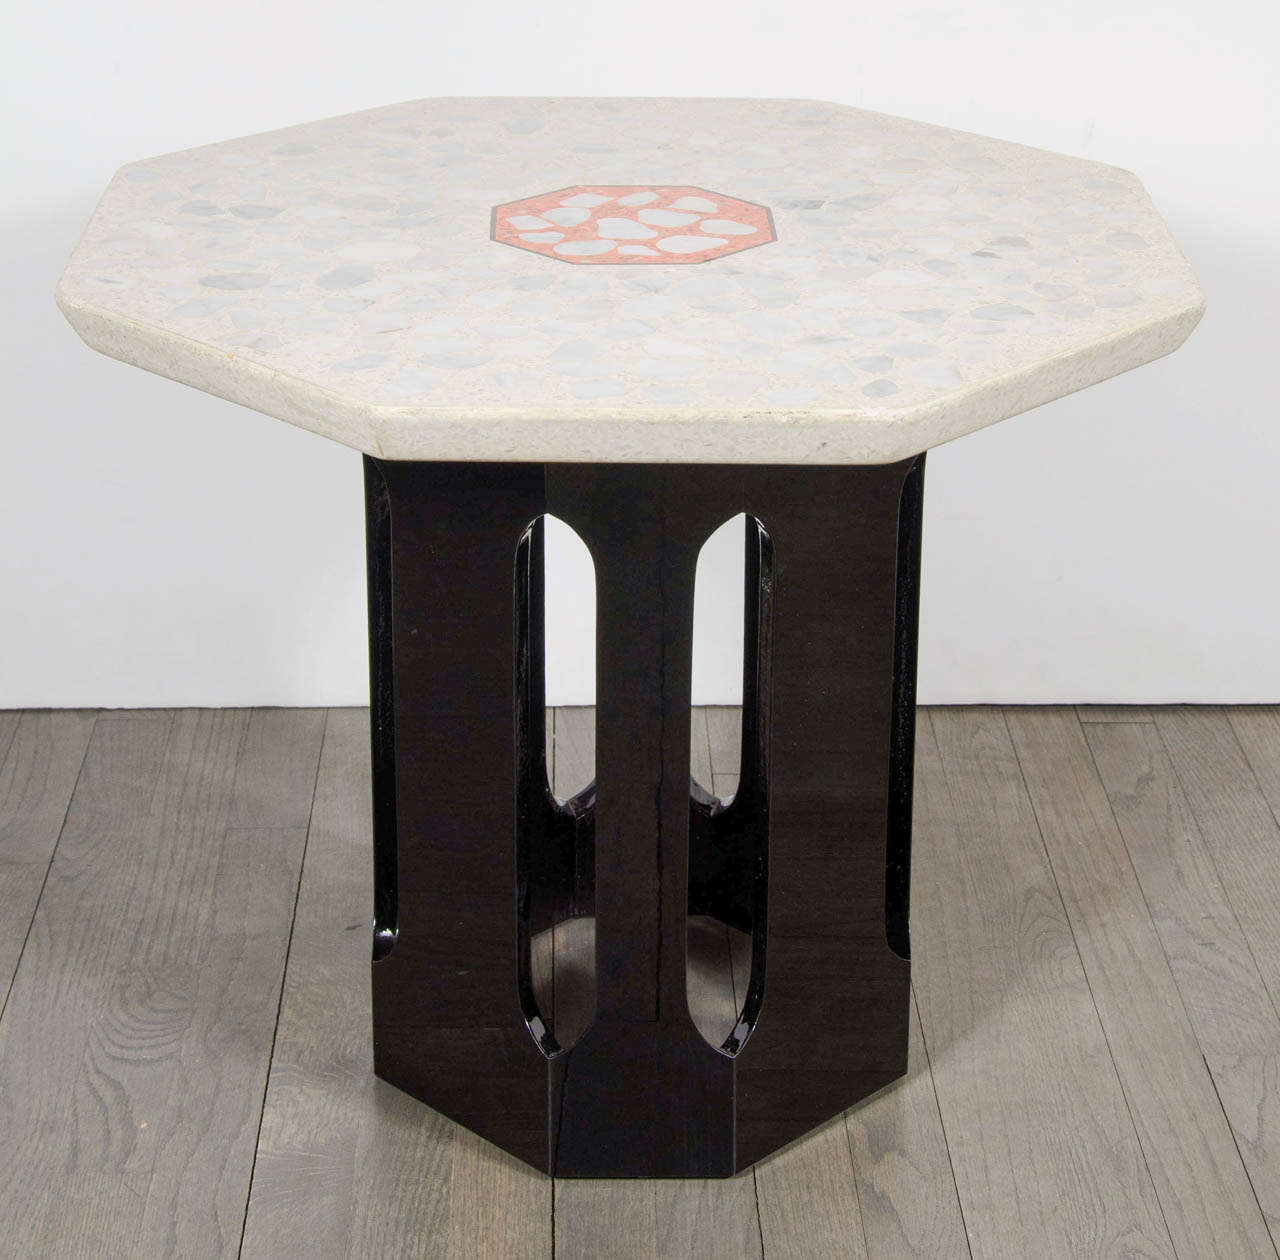 This rare and stunning occasional table by Harvey Probber- the legendary Mid Century Modern designer who produced elegant hand crafted furniture in Fall River, Massachusetts.  It features an octagonal terrazzo top with a decorative inlaid design in